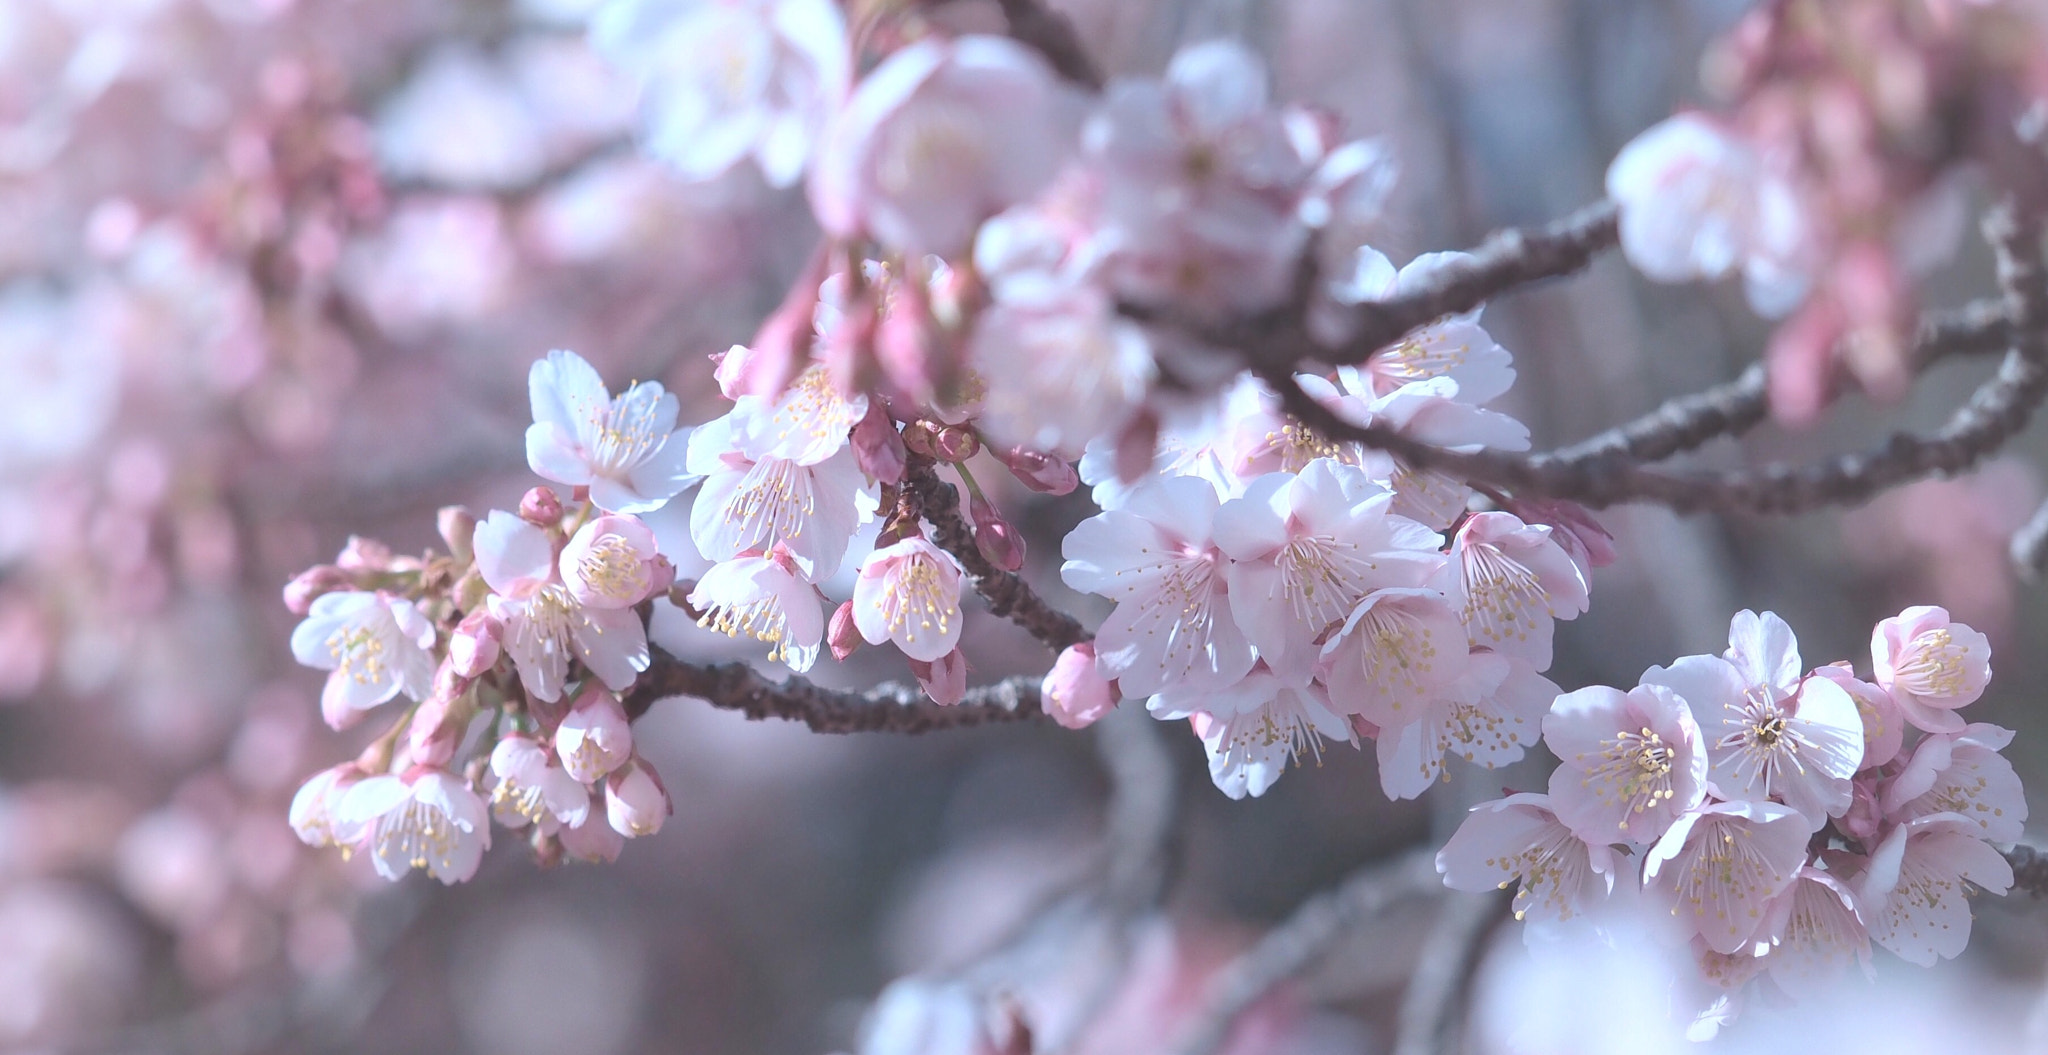 Olympus PEN E-PL7 sample photo. Winter blooming cherry photography